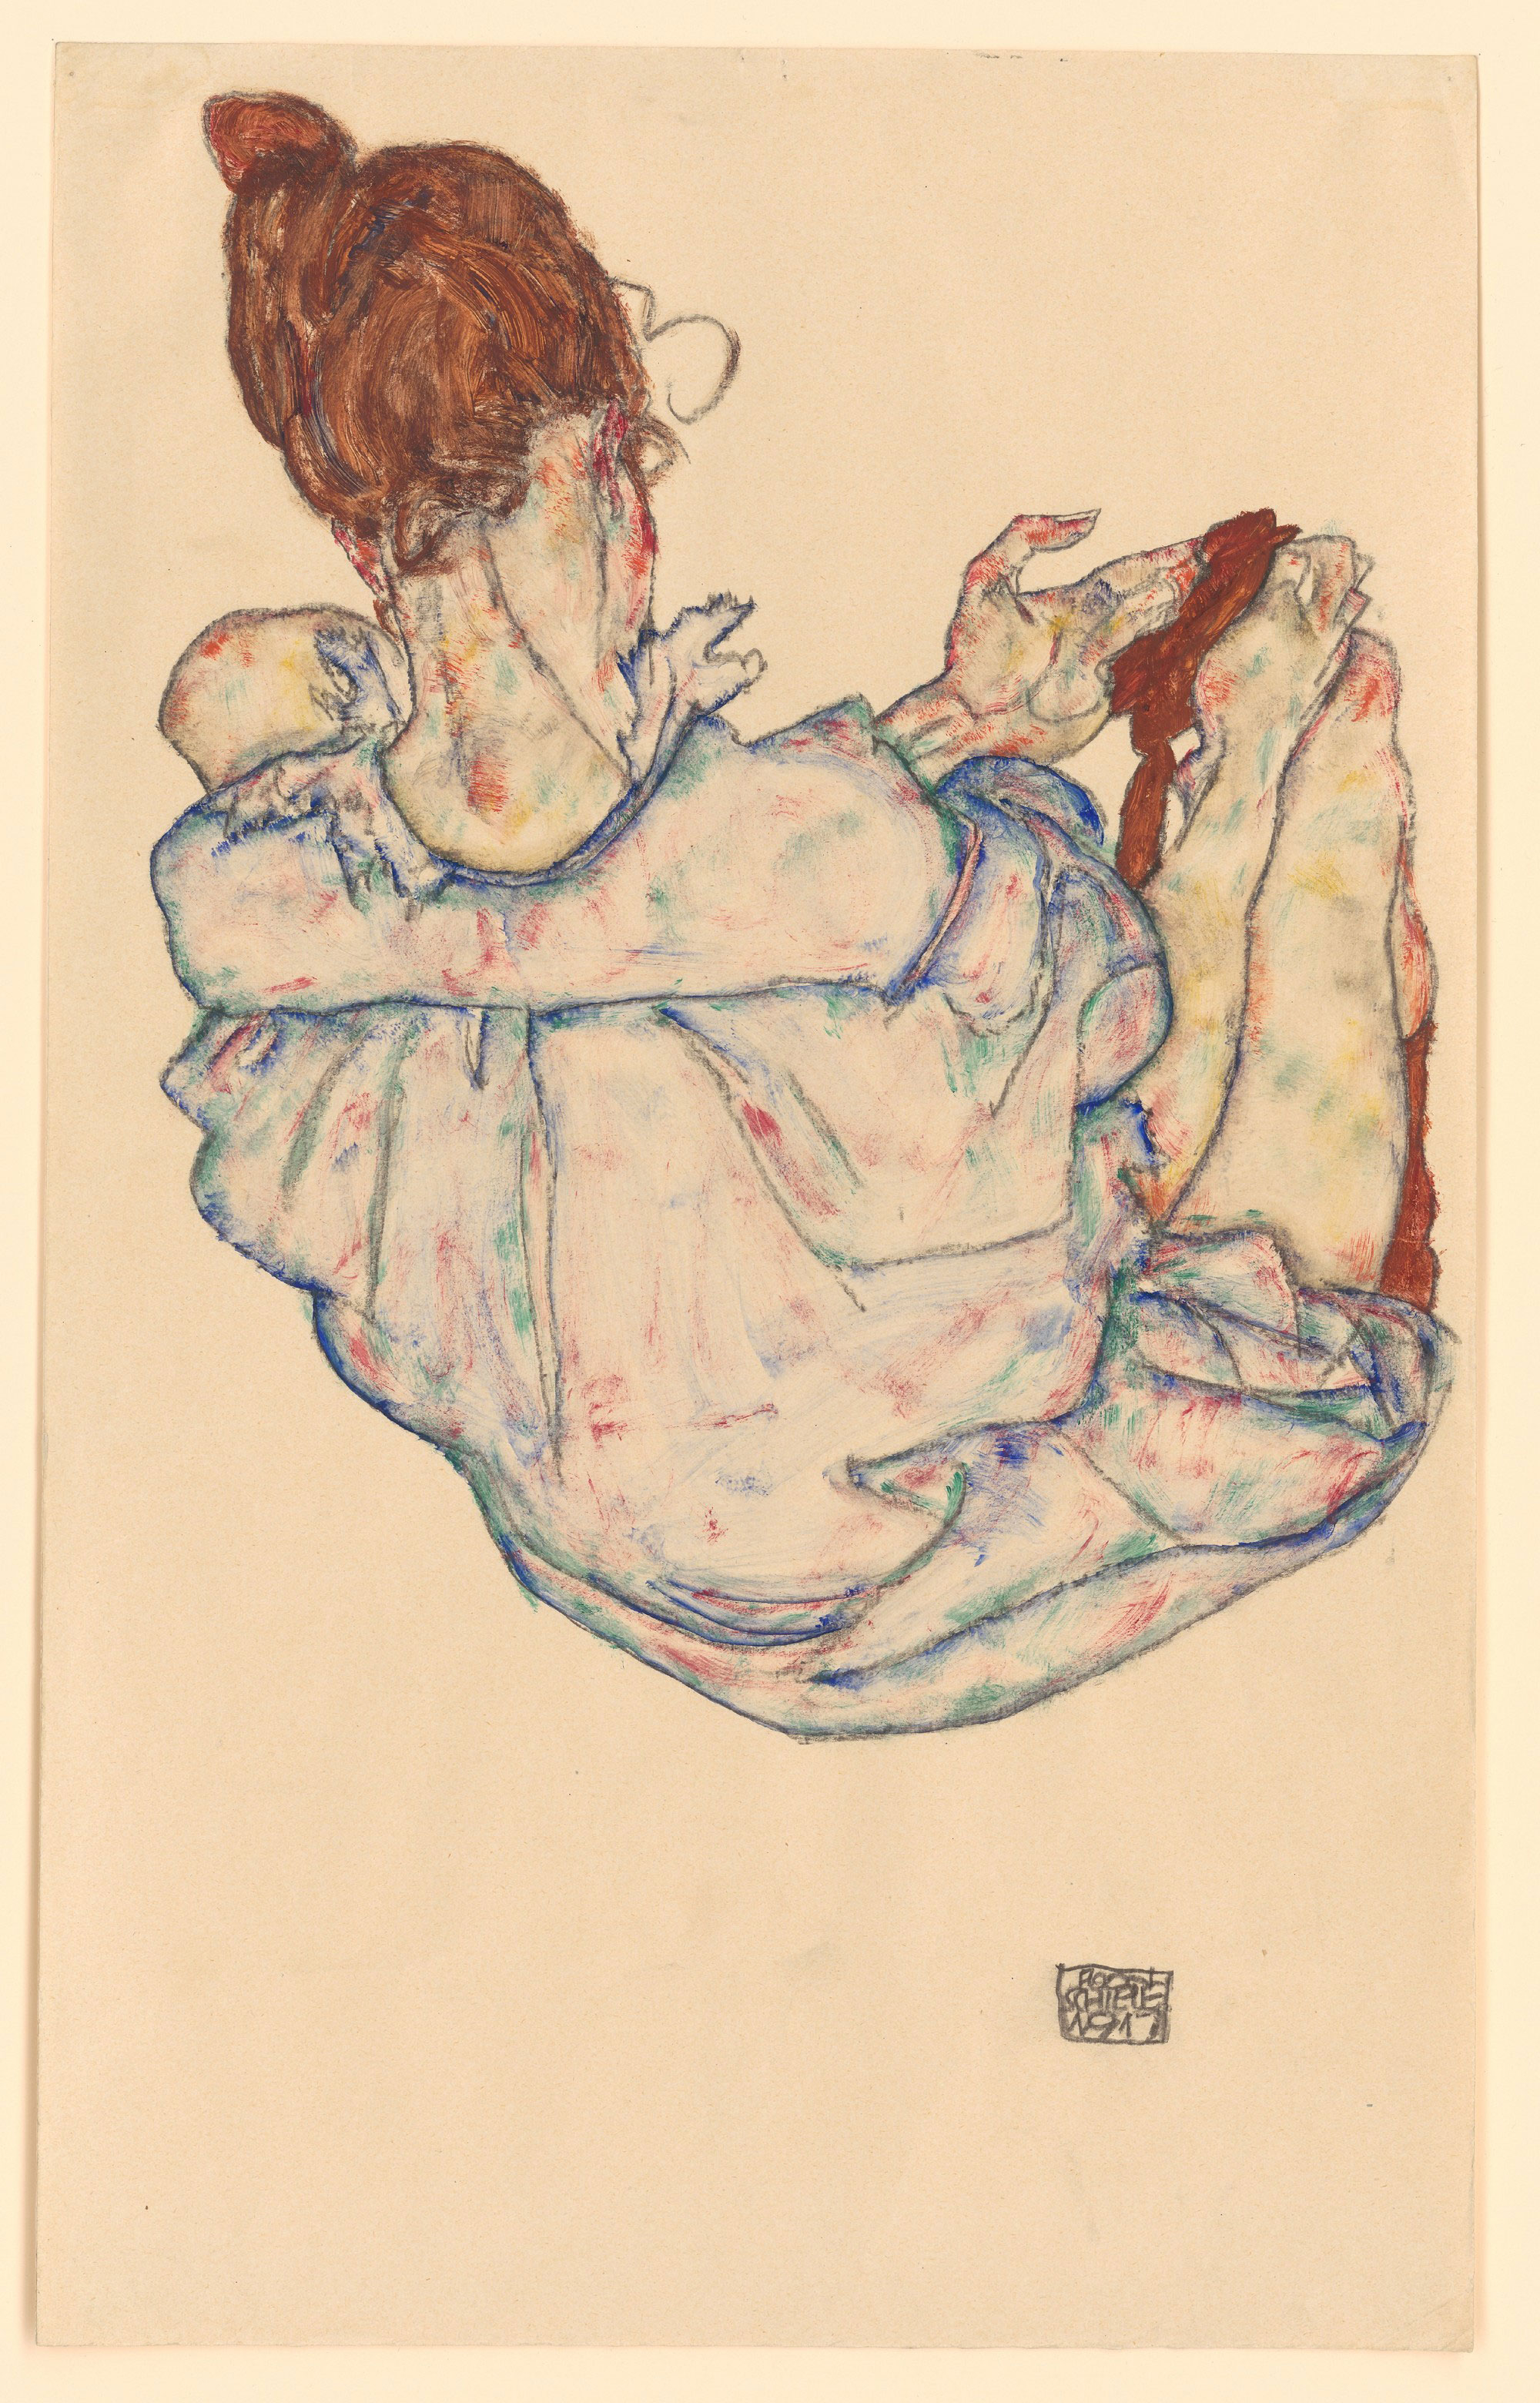 Enlarged view: A seated woman seen from behind. The shapes are slightly distorted, with vivid colors and lines. The mood is intimate and thoughtful.